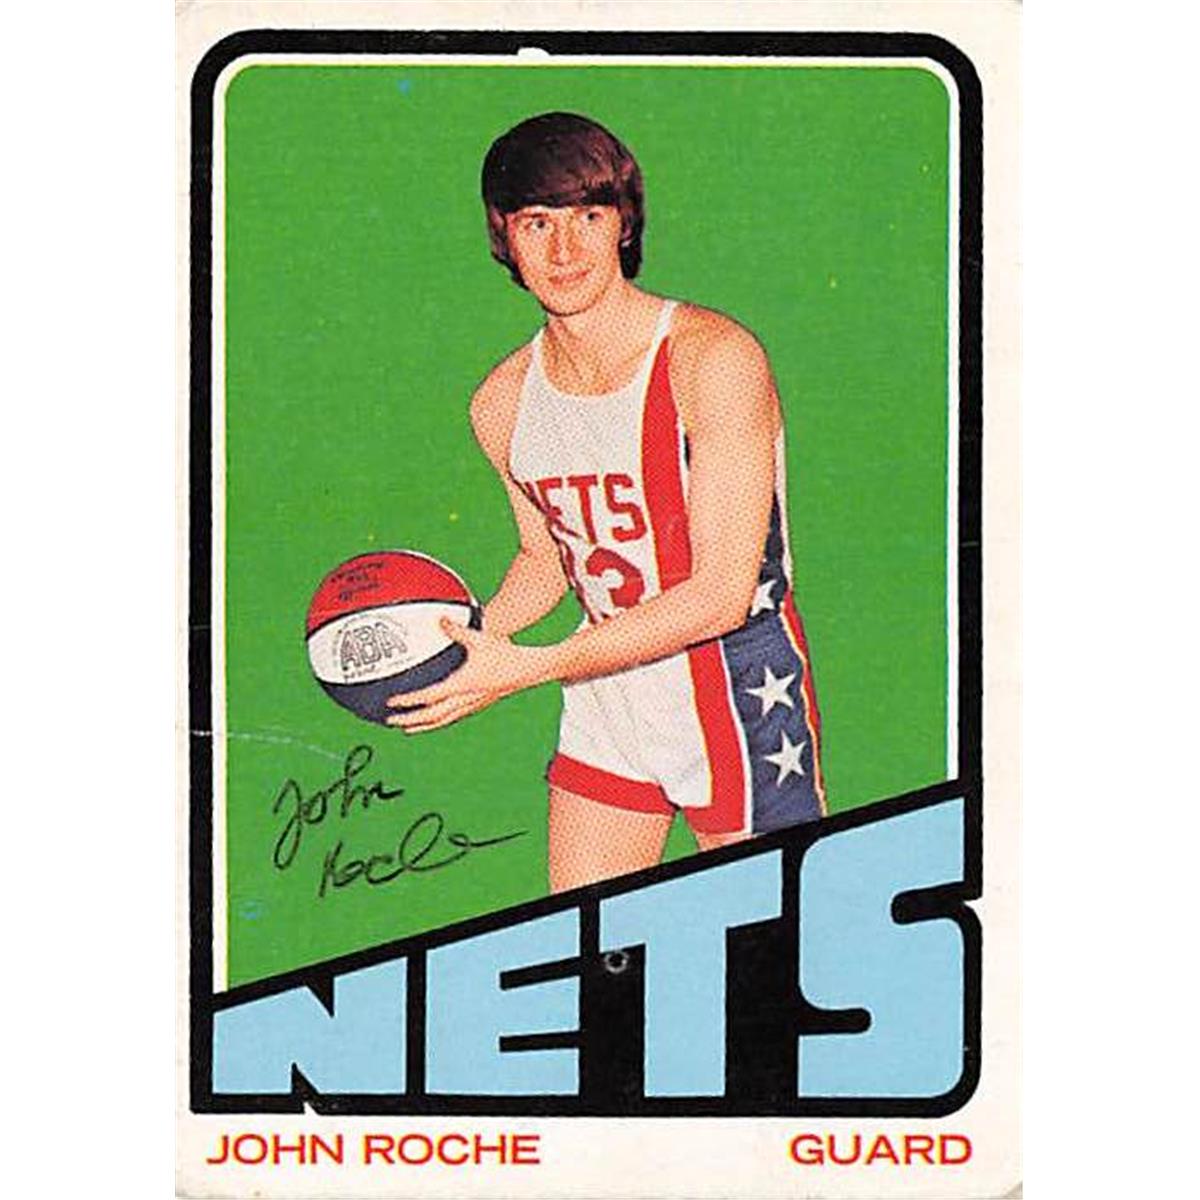 Picture of Autograph Warehouse 376874 John Roche Autographed Basketball Card - New York Nets ABA 1972 Topps No.182